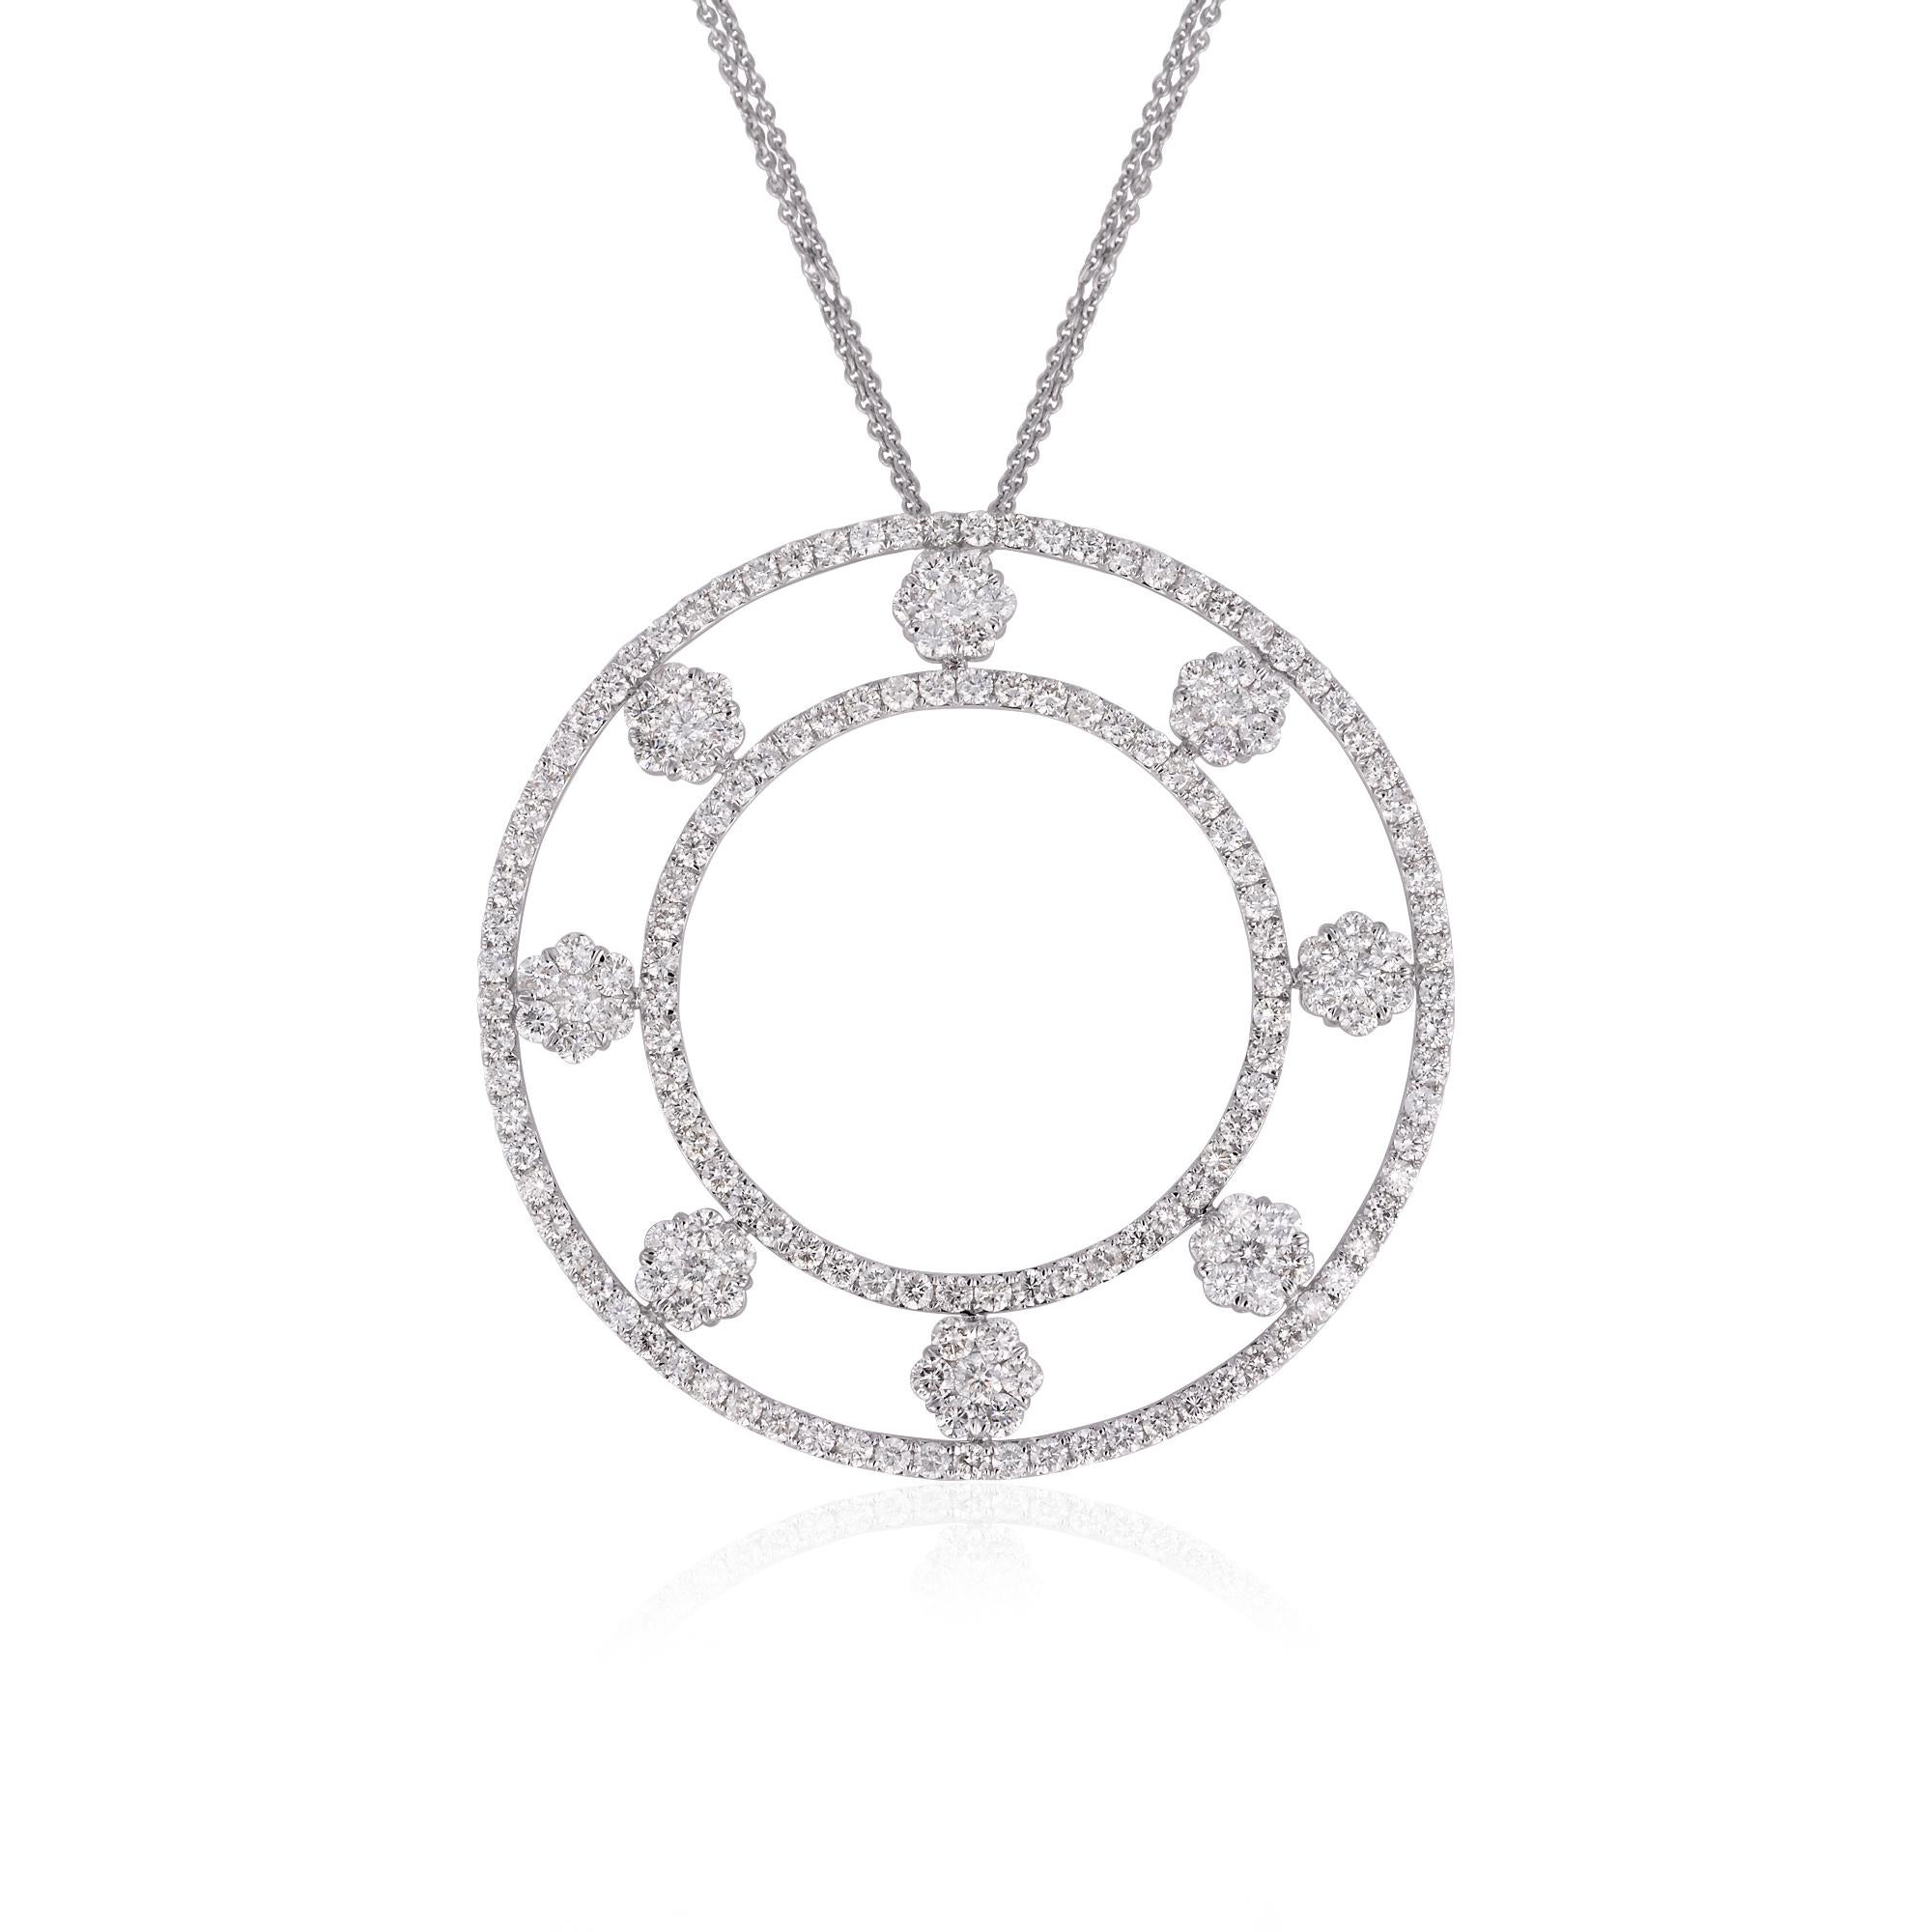 Introducing our extraordinary handmade jewelry masterpiece: a 9.10-carat diamond circle pendant necklace, meticulously crafted in 18-karat white gold.

Item Code :- CN-24532
Gross Wt. :- 17.45 gm
18k White Gold Wt. :- 15.63 gm
Natural Diamond Wt. :-